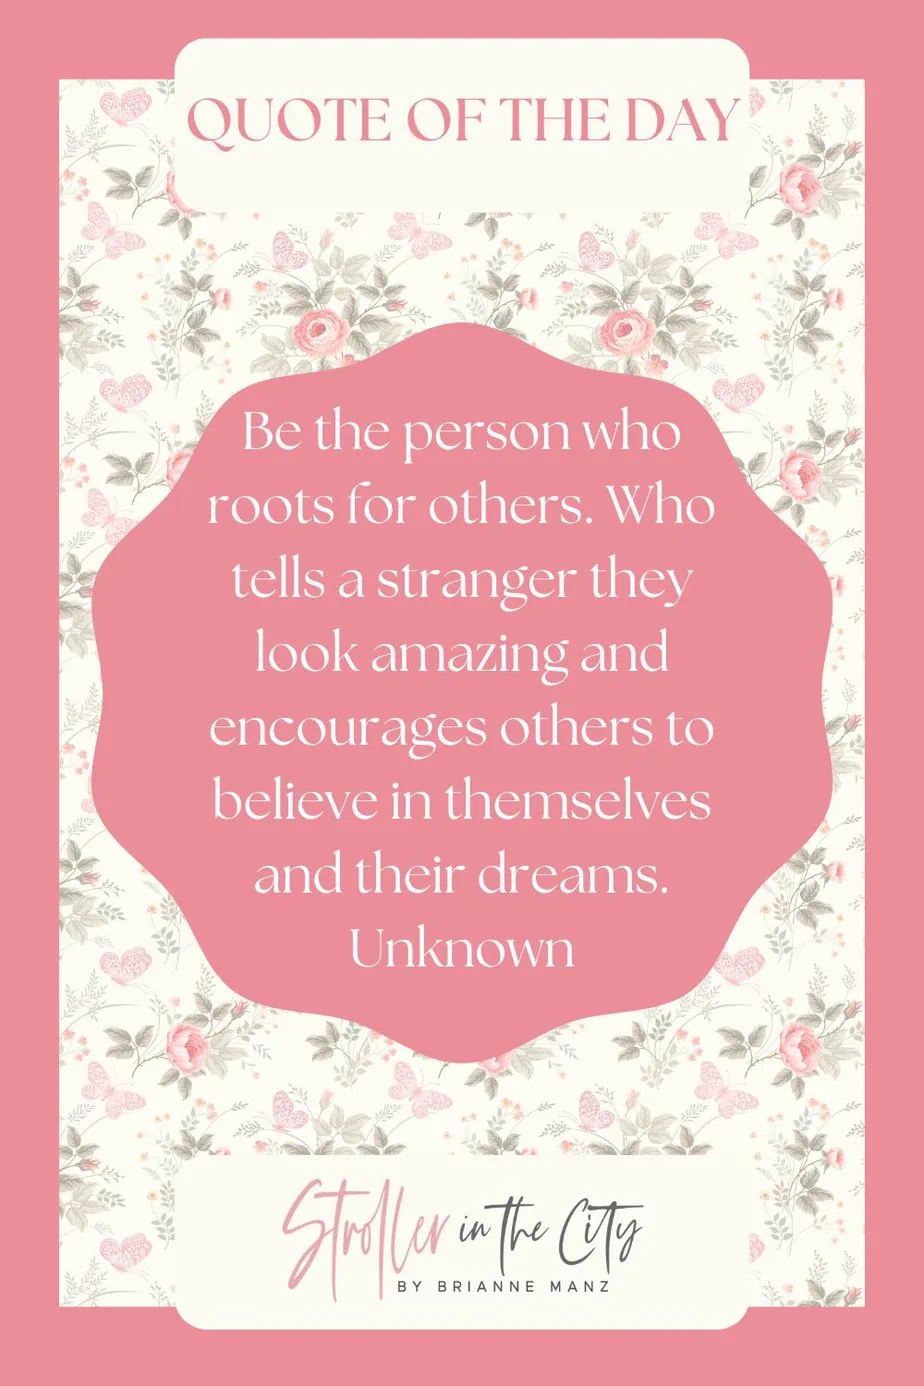 Birthday quote Text:/ Ne the person who roots for others, who tells a strange they look amazing and encourages others to believe in themselves and their dreams